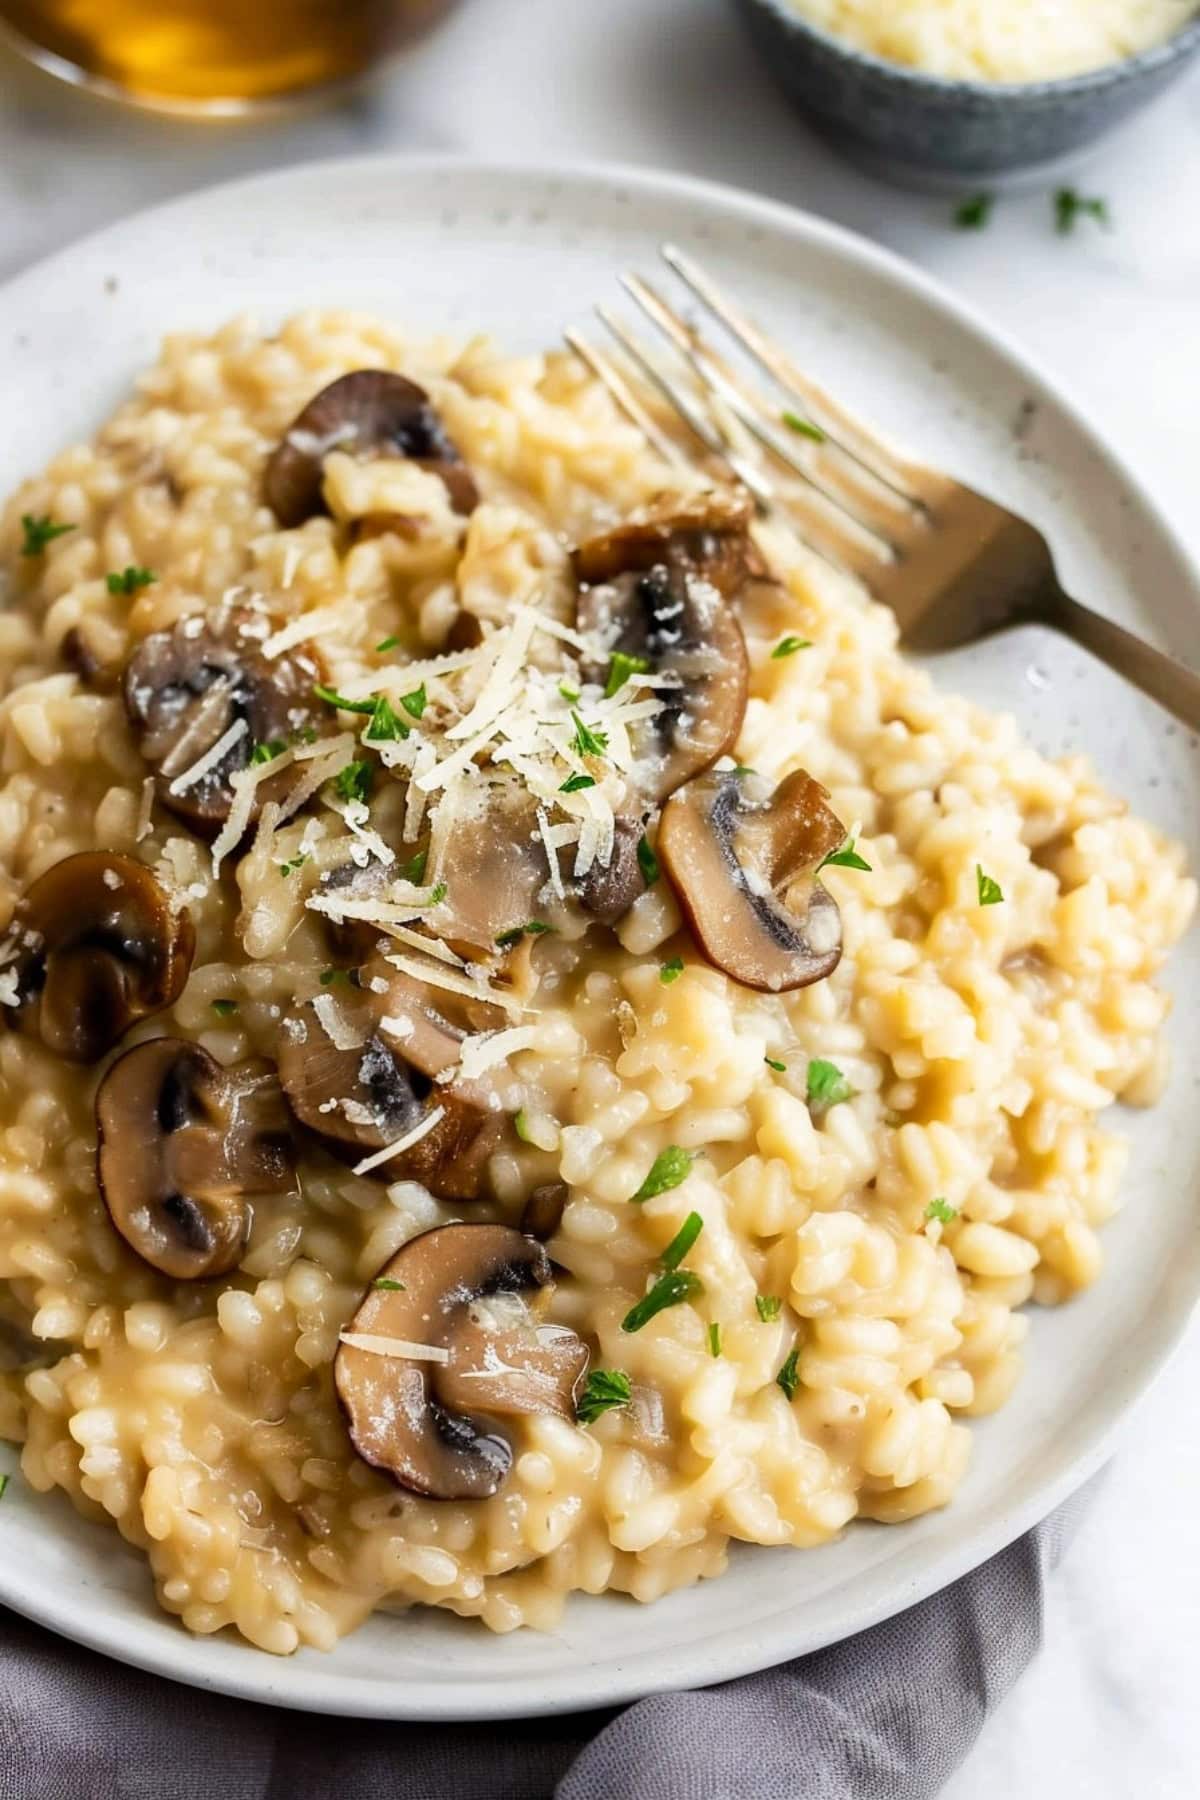 Mushroom risotto served in a white plate, topped with a sprinkle of Parmesan and green parsley.